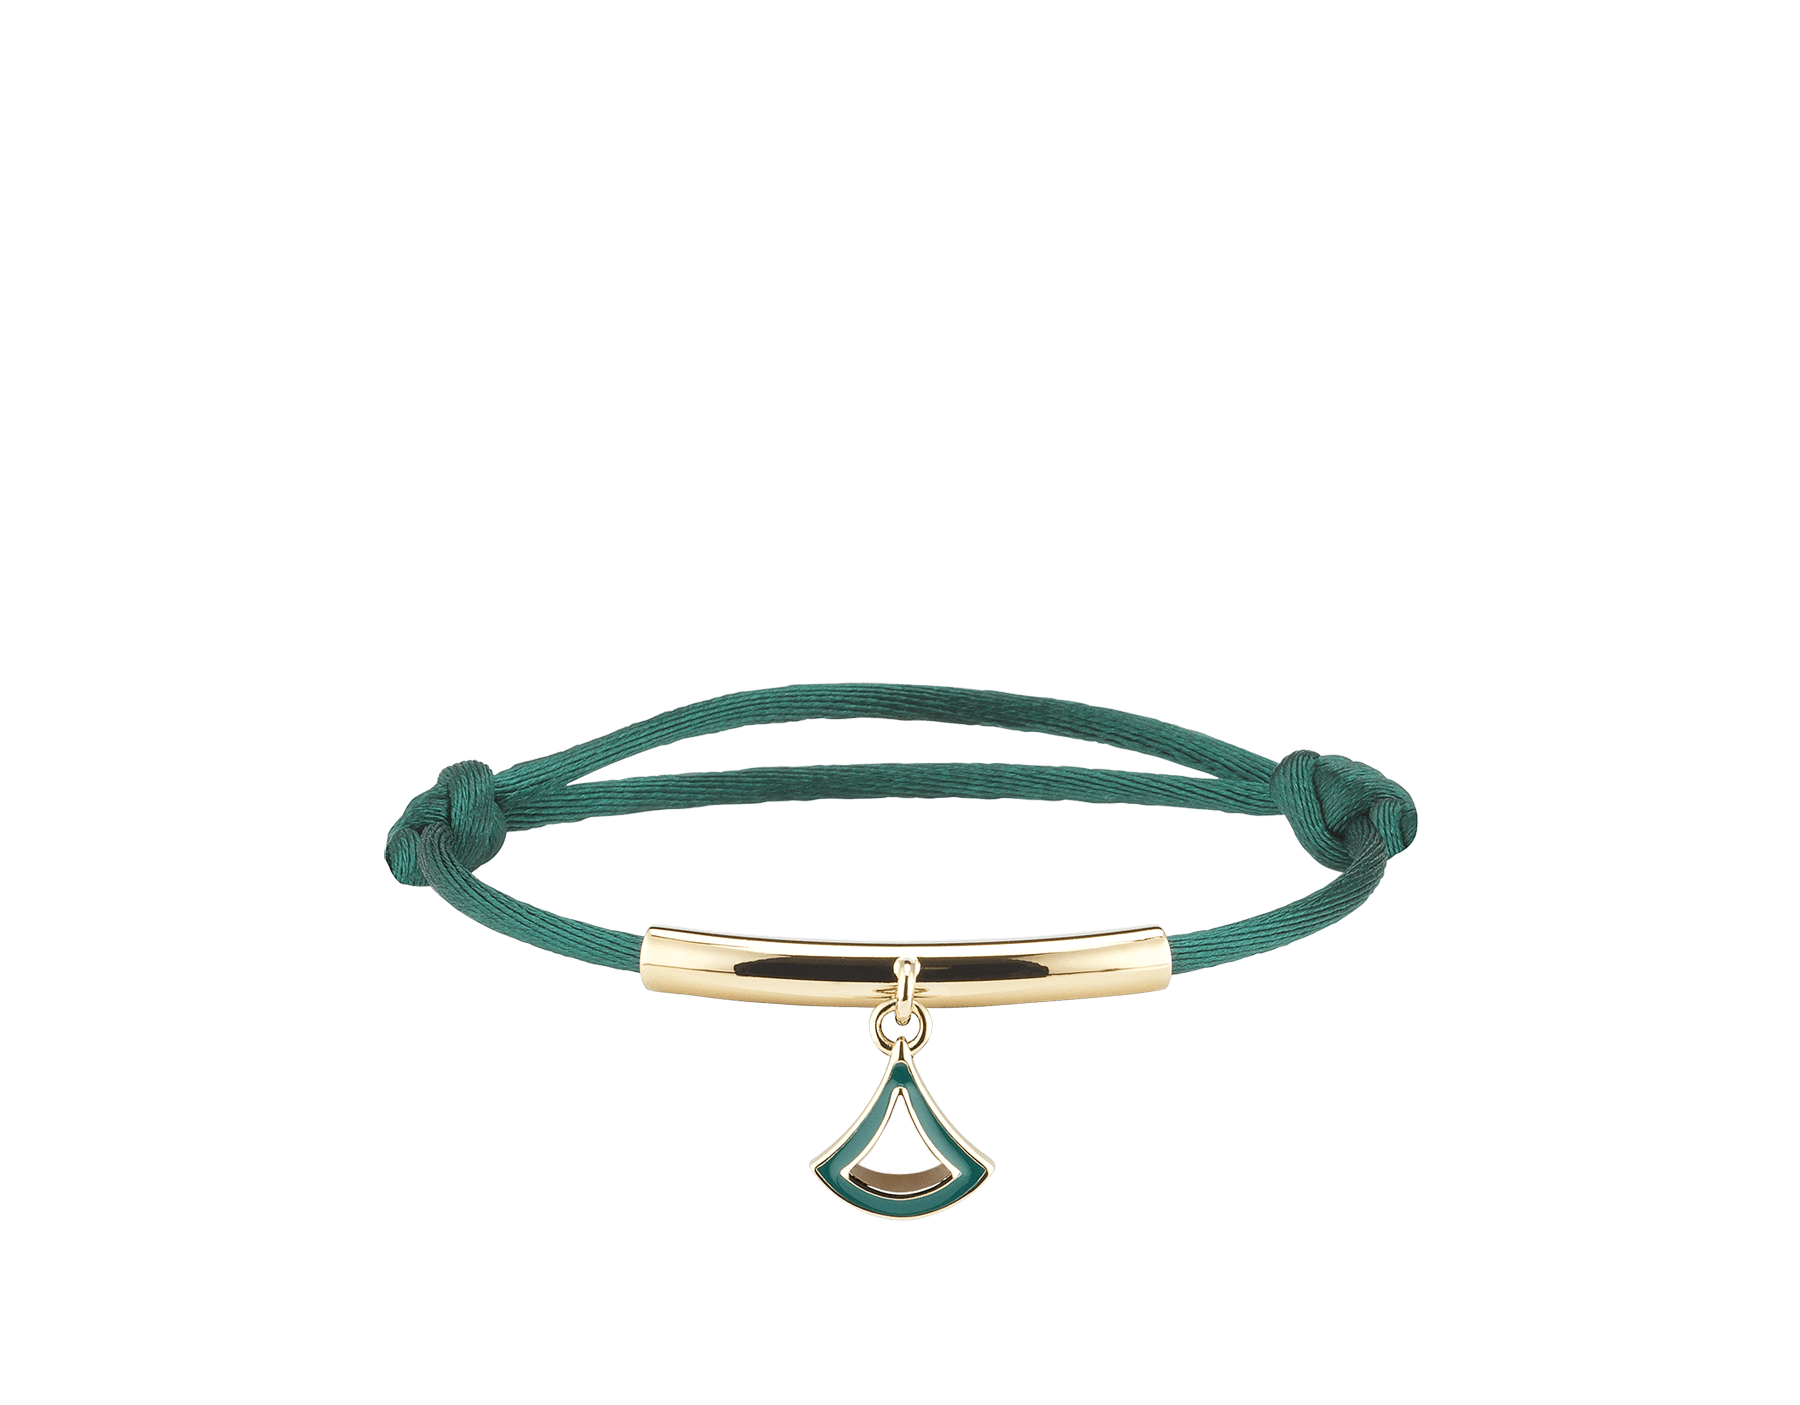 Divas’ Dream bracelet in emerald green fabric. Light gold-plated brass tubular element with refined charm embellished with emerald green enamel. DIVAMINISTRINGb image 1